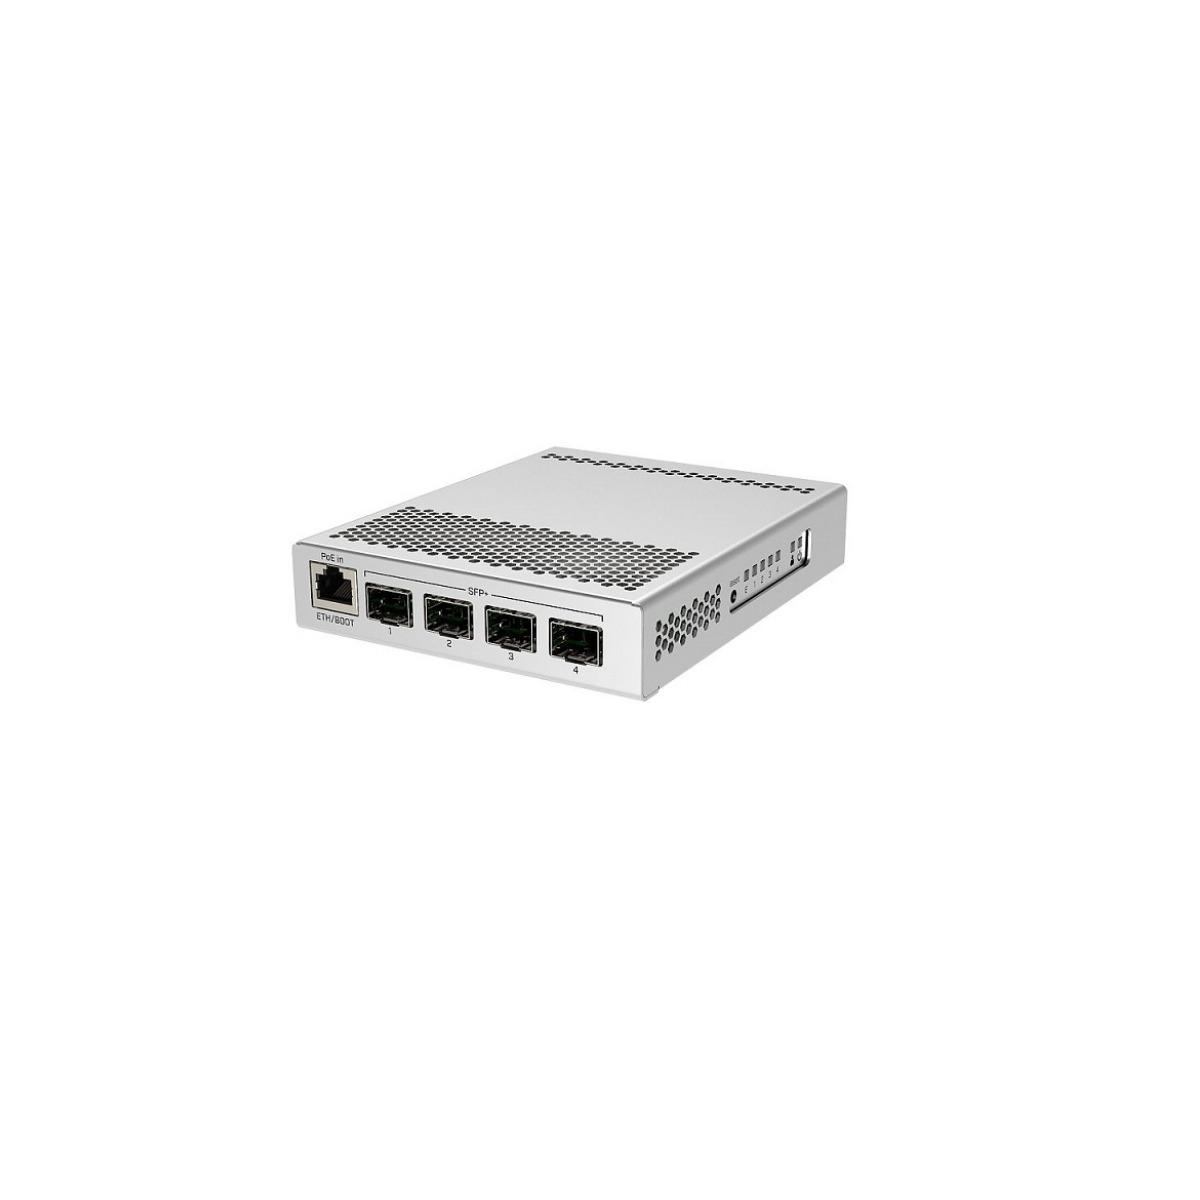 5 CRS305-1G-4S+IN Switch MIKROTIK